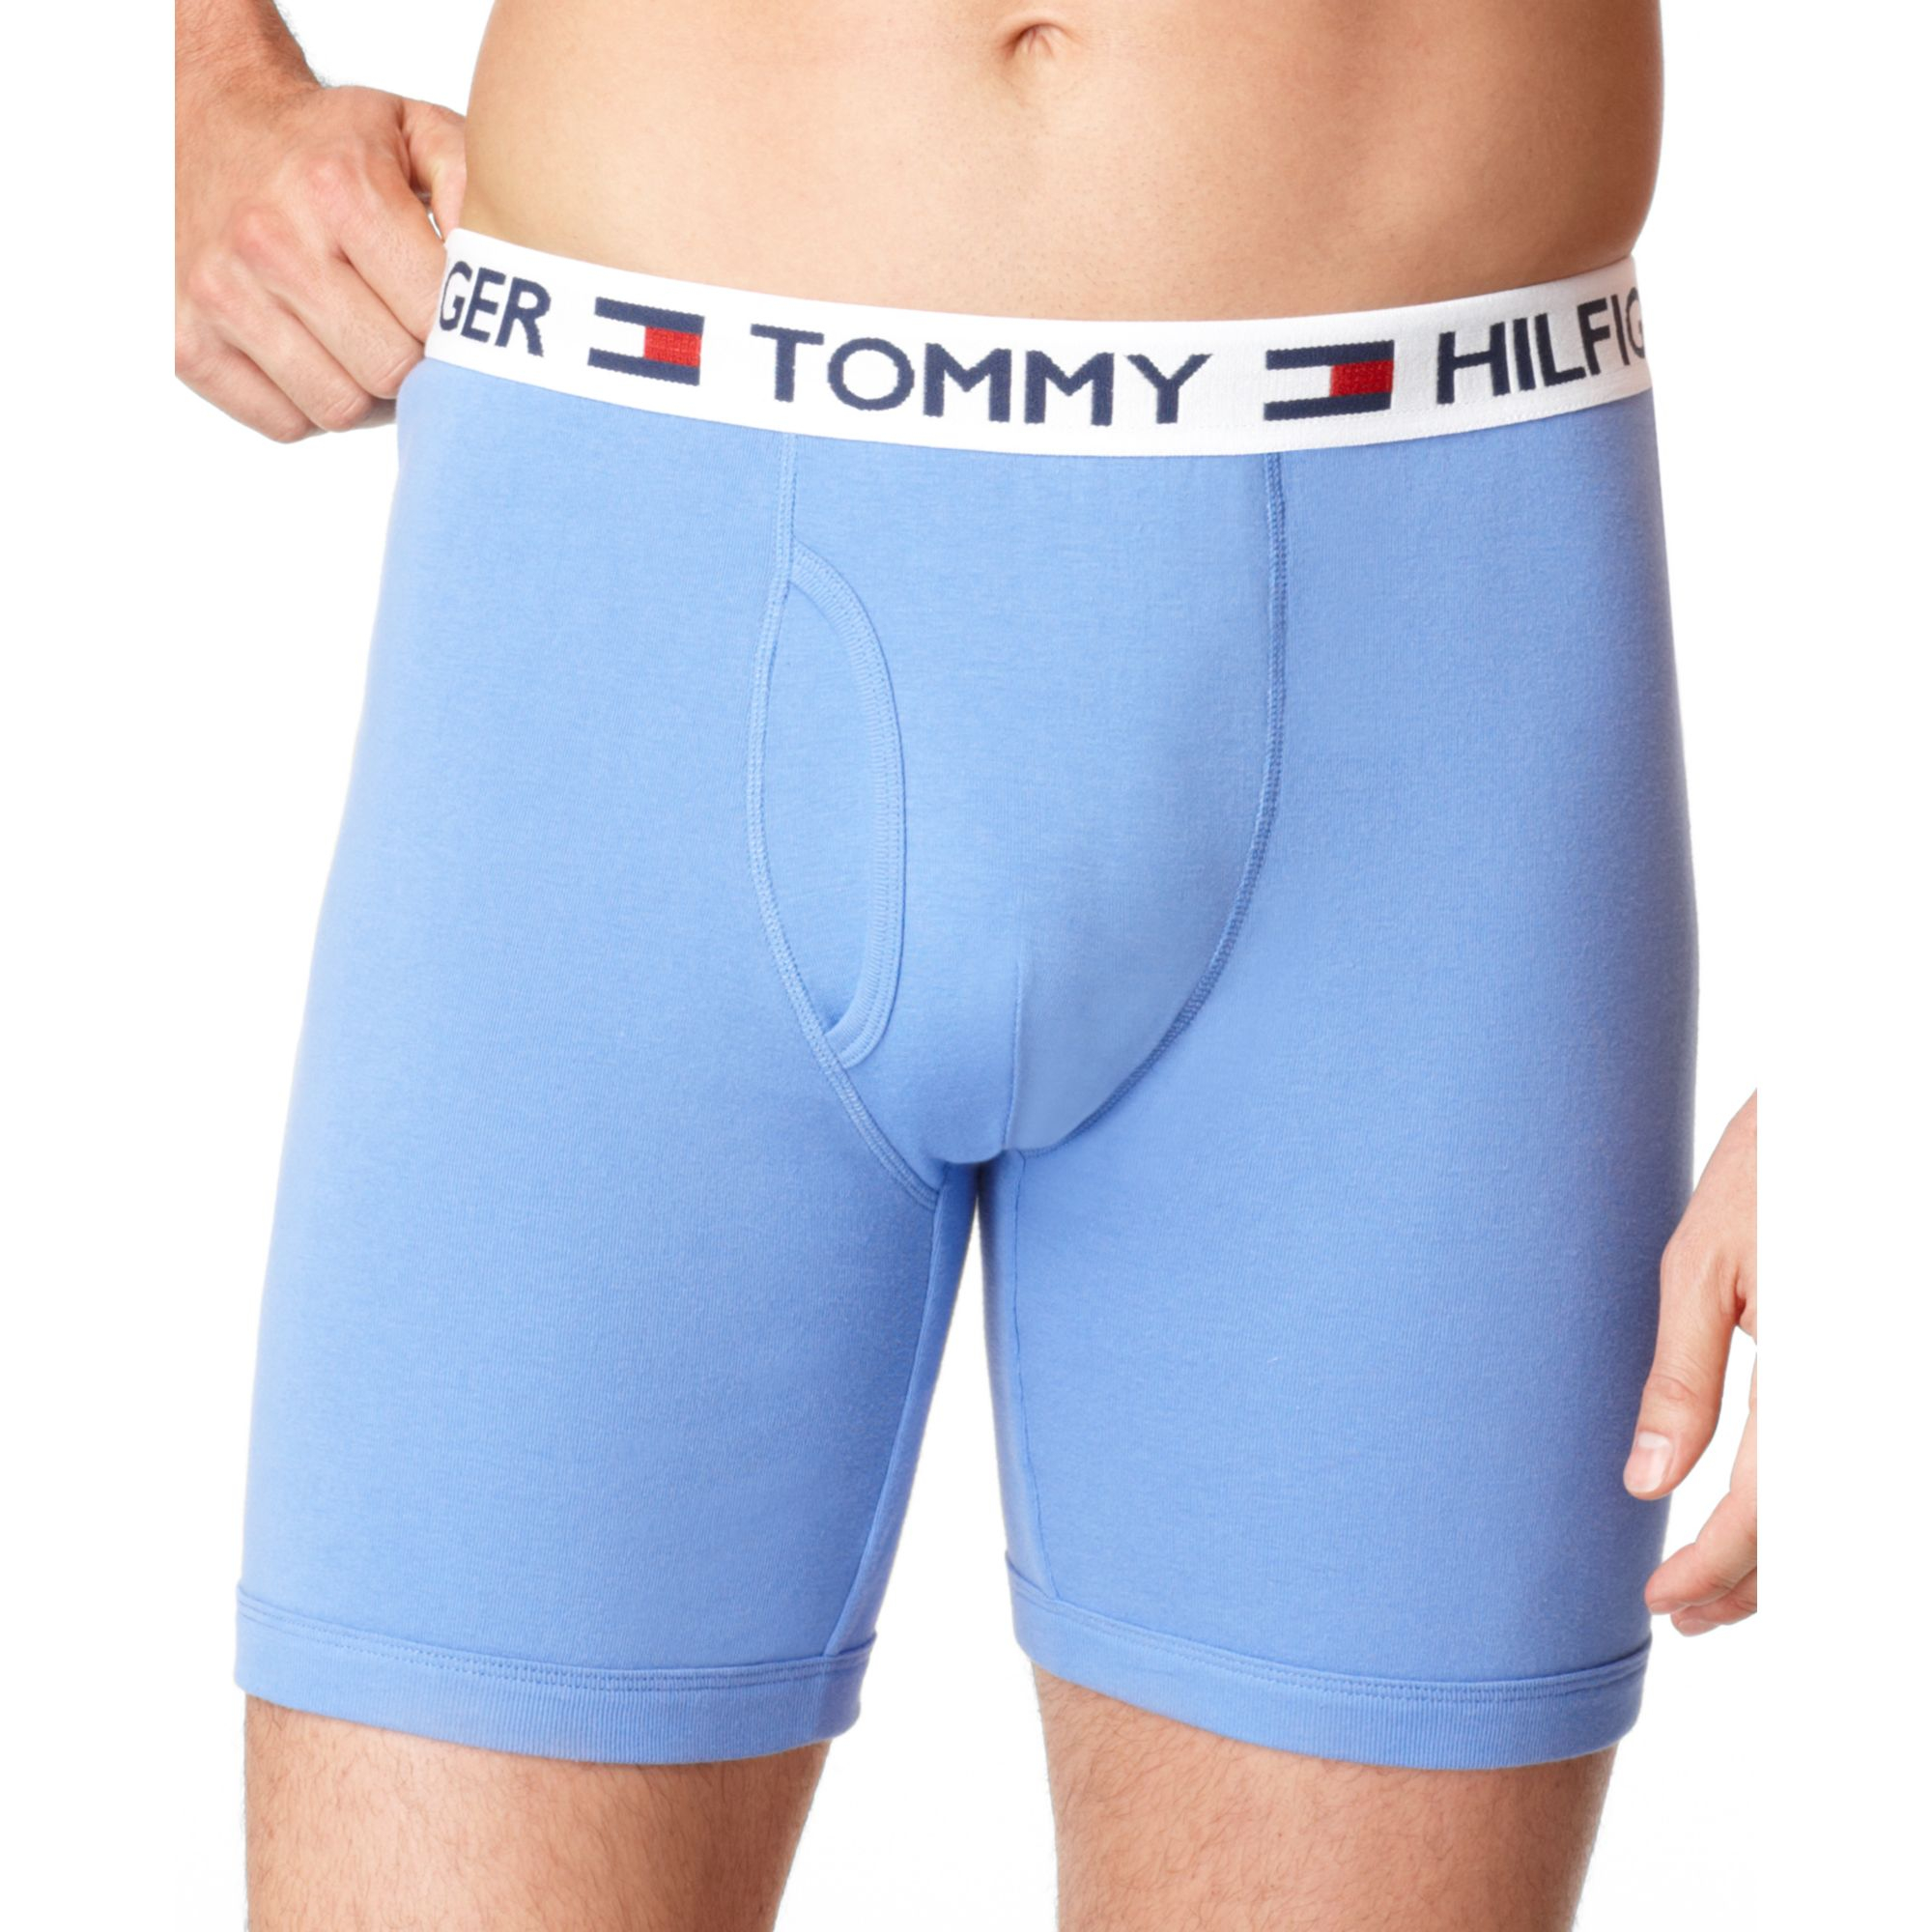 Tommy Hilfiger 4 Pack Boxer Brief in 